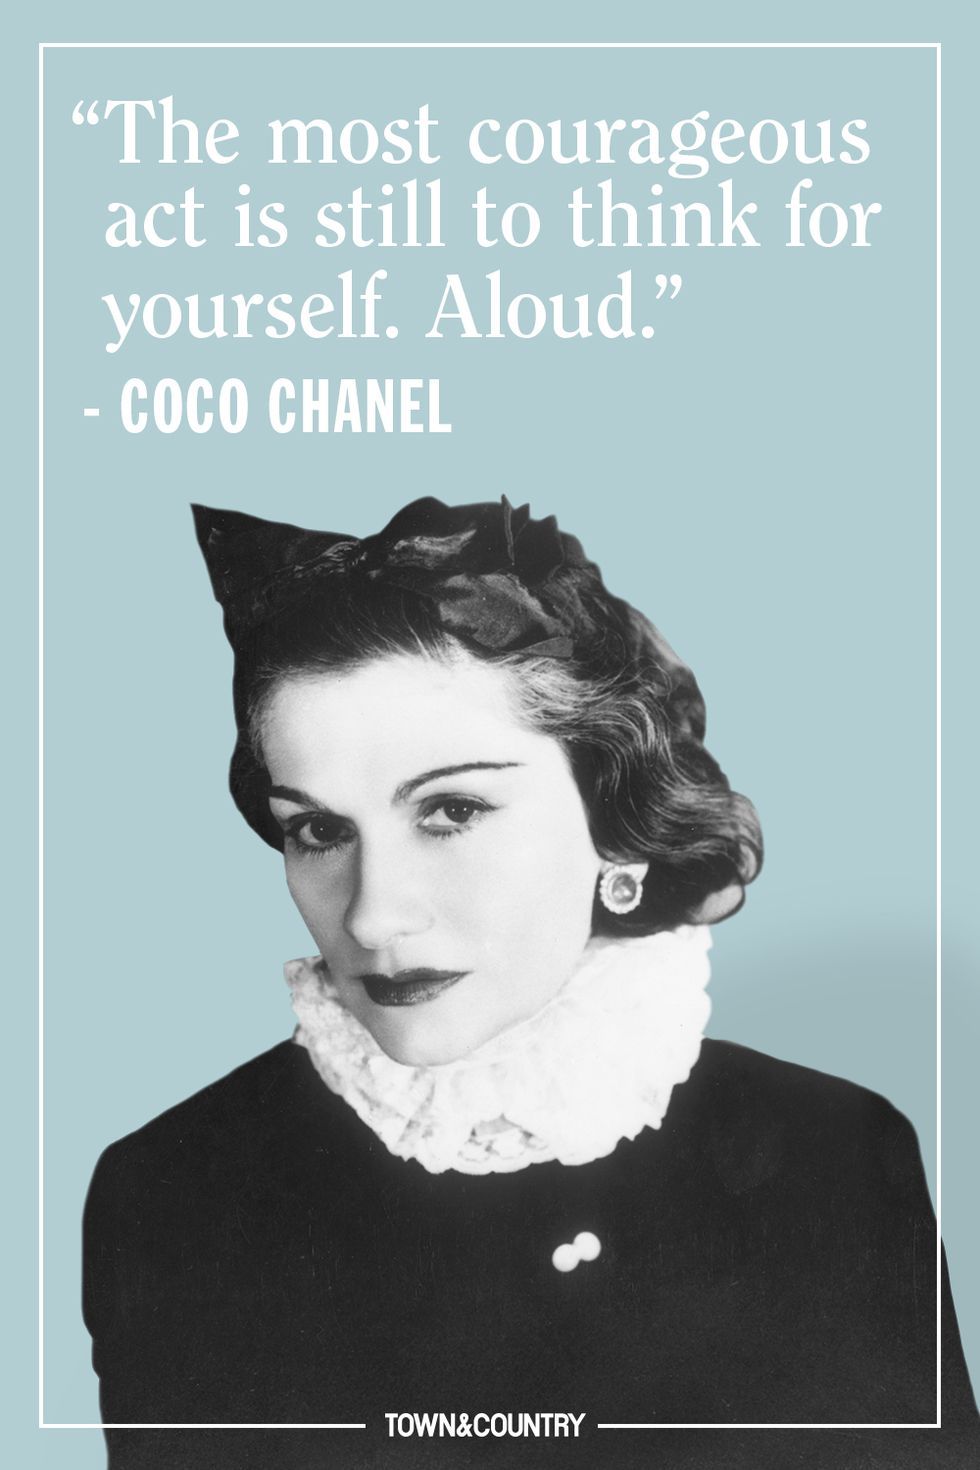 25 Coco Chanel Quotes on Life, Fashion, and True Style For